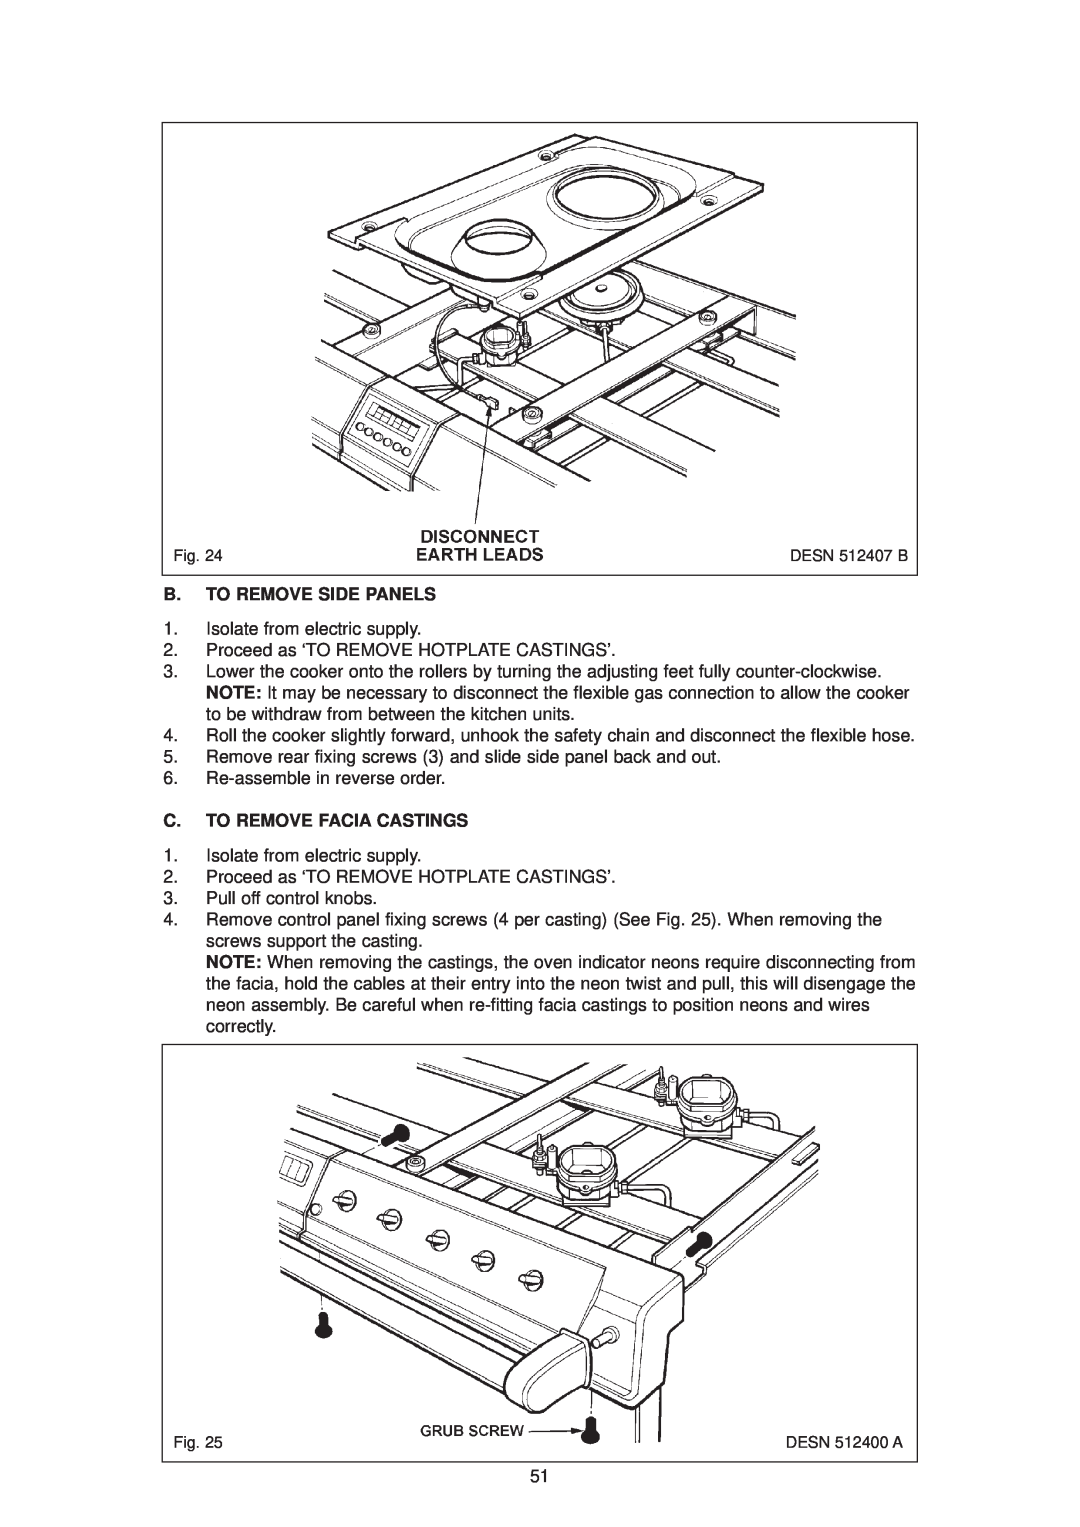 Aga Ranges DC6 (FFD) owner manual B. To Remove Side Panels, C. To Remove Facia Castings, DESN 512407 B, DESN 512400 A 